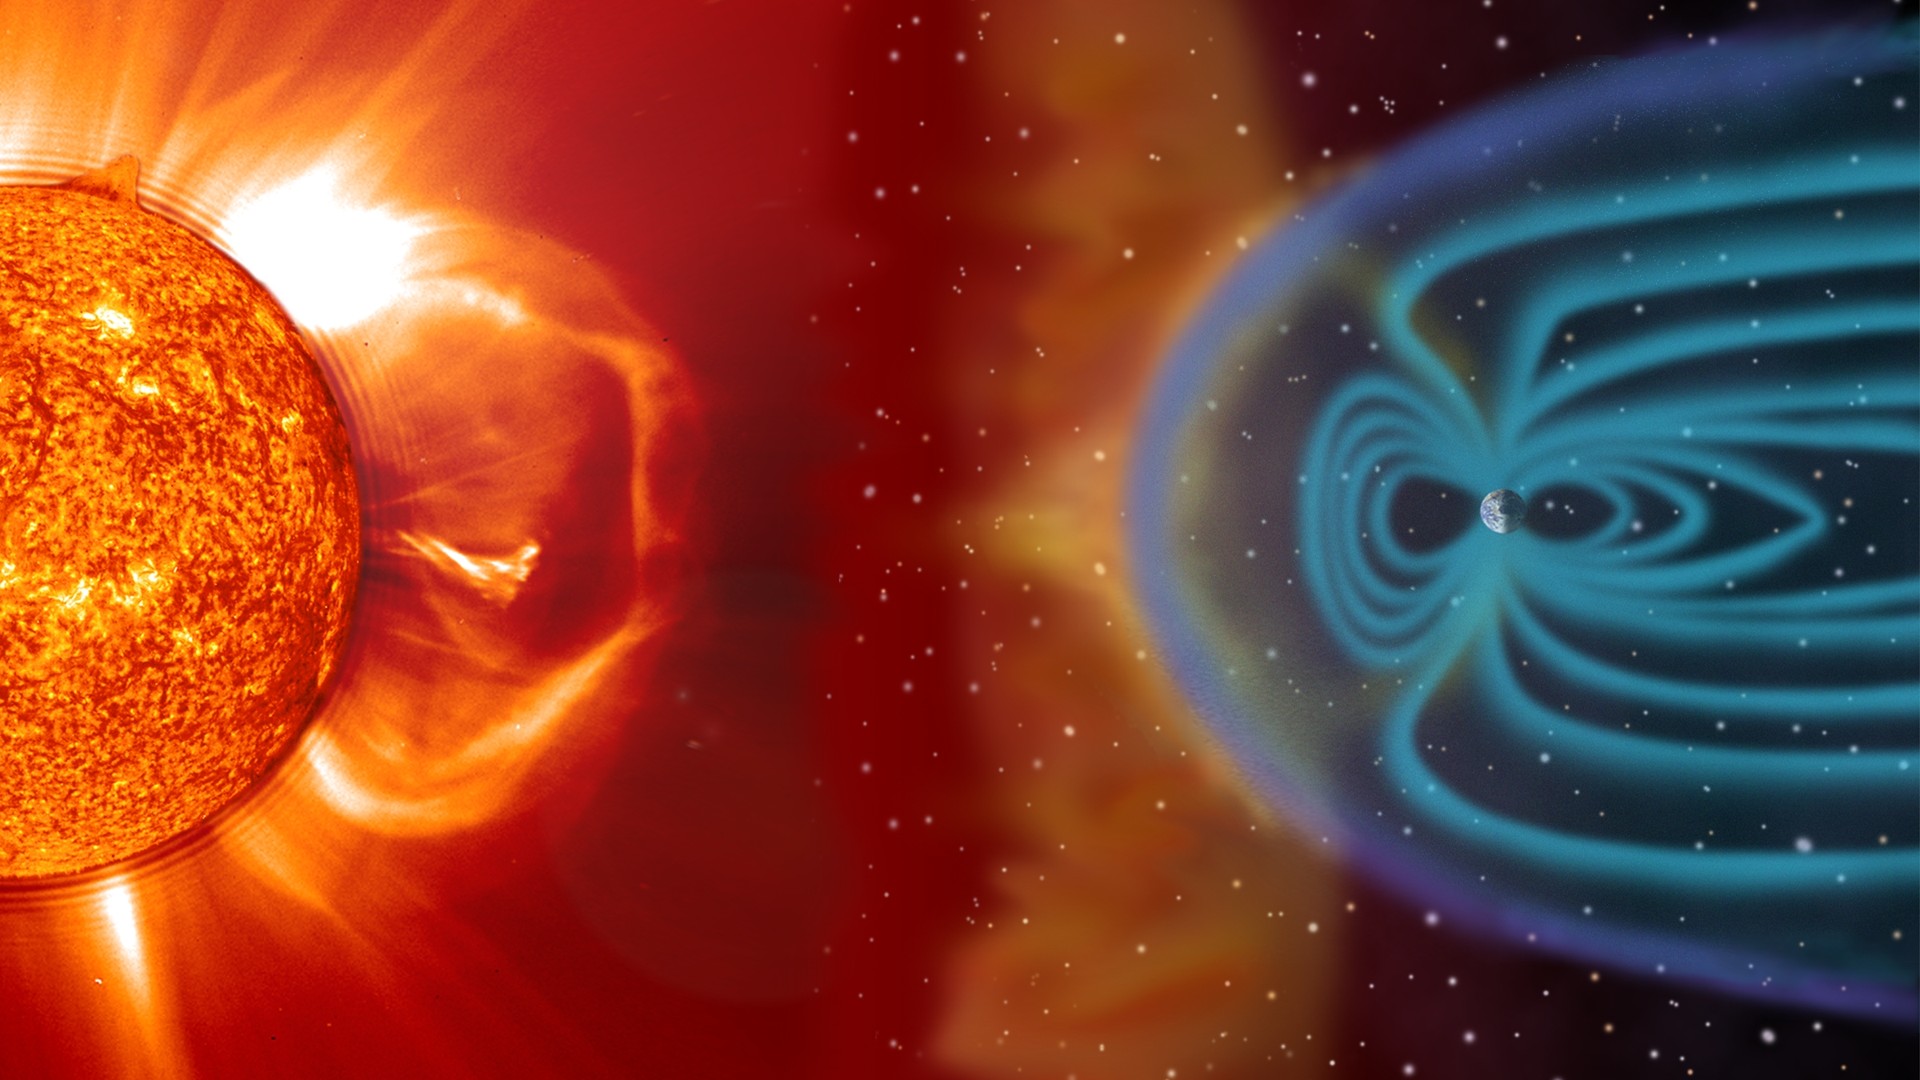 The Carrington Event: The largest recorded solar storm in history